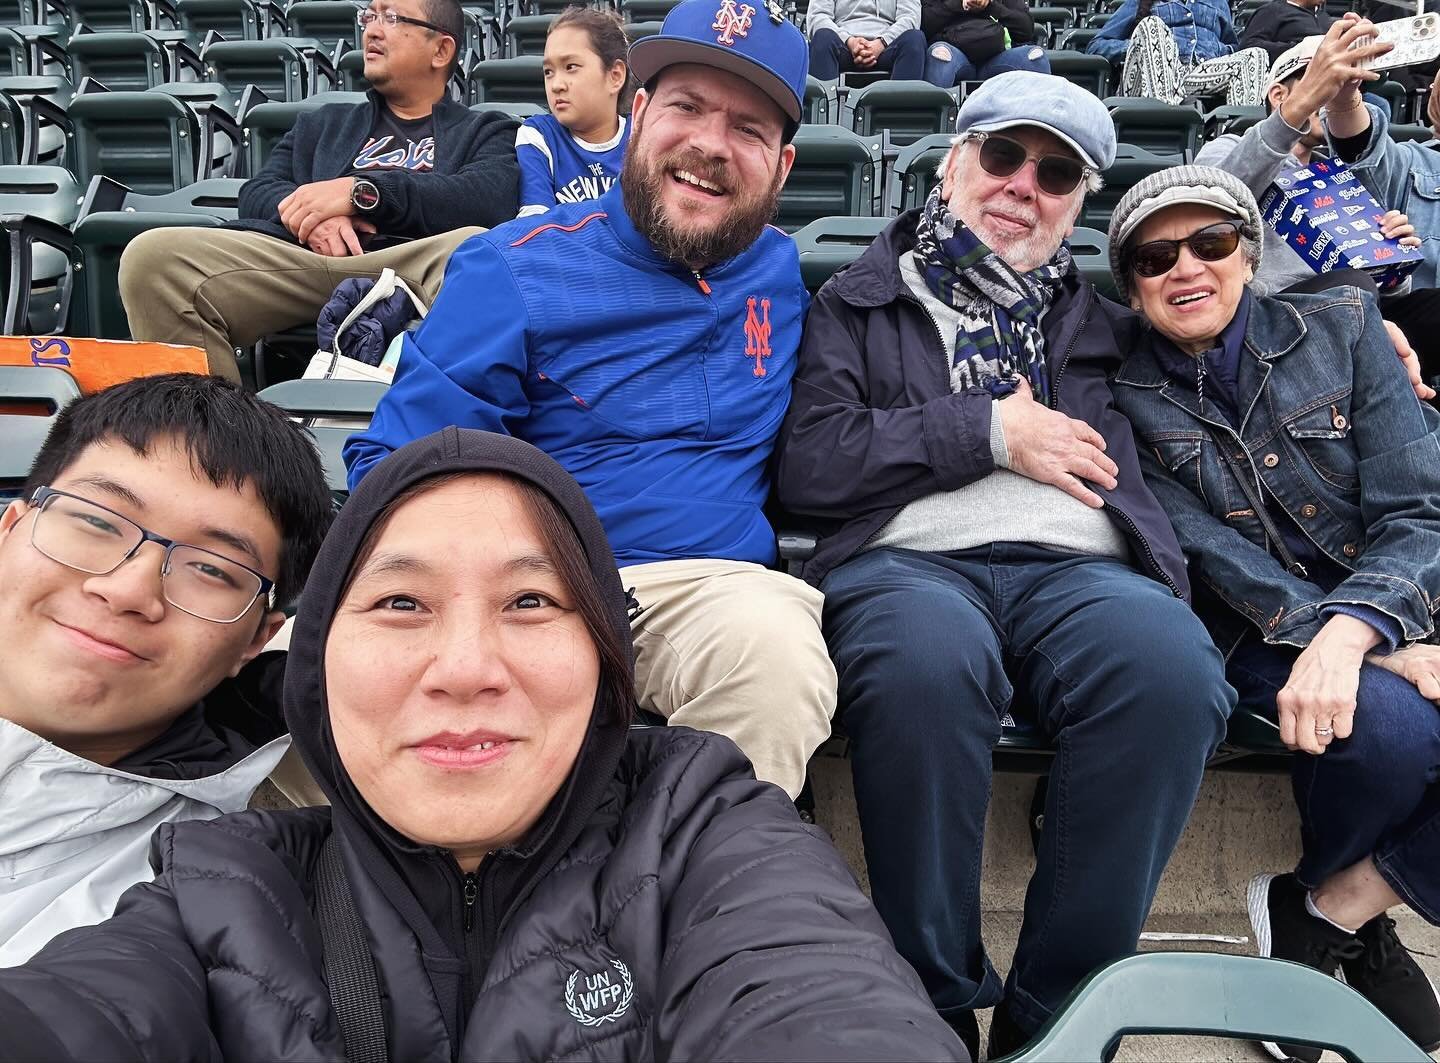 We had a wonderful time of fellowship at Citi Field this past Saturday. The Mets might&rsquo;ve lost, but we won because we spent time together as a family in Christ. A church exists for more than just Sunday morning. Rather we are called to love lif